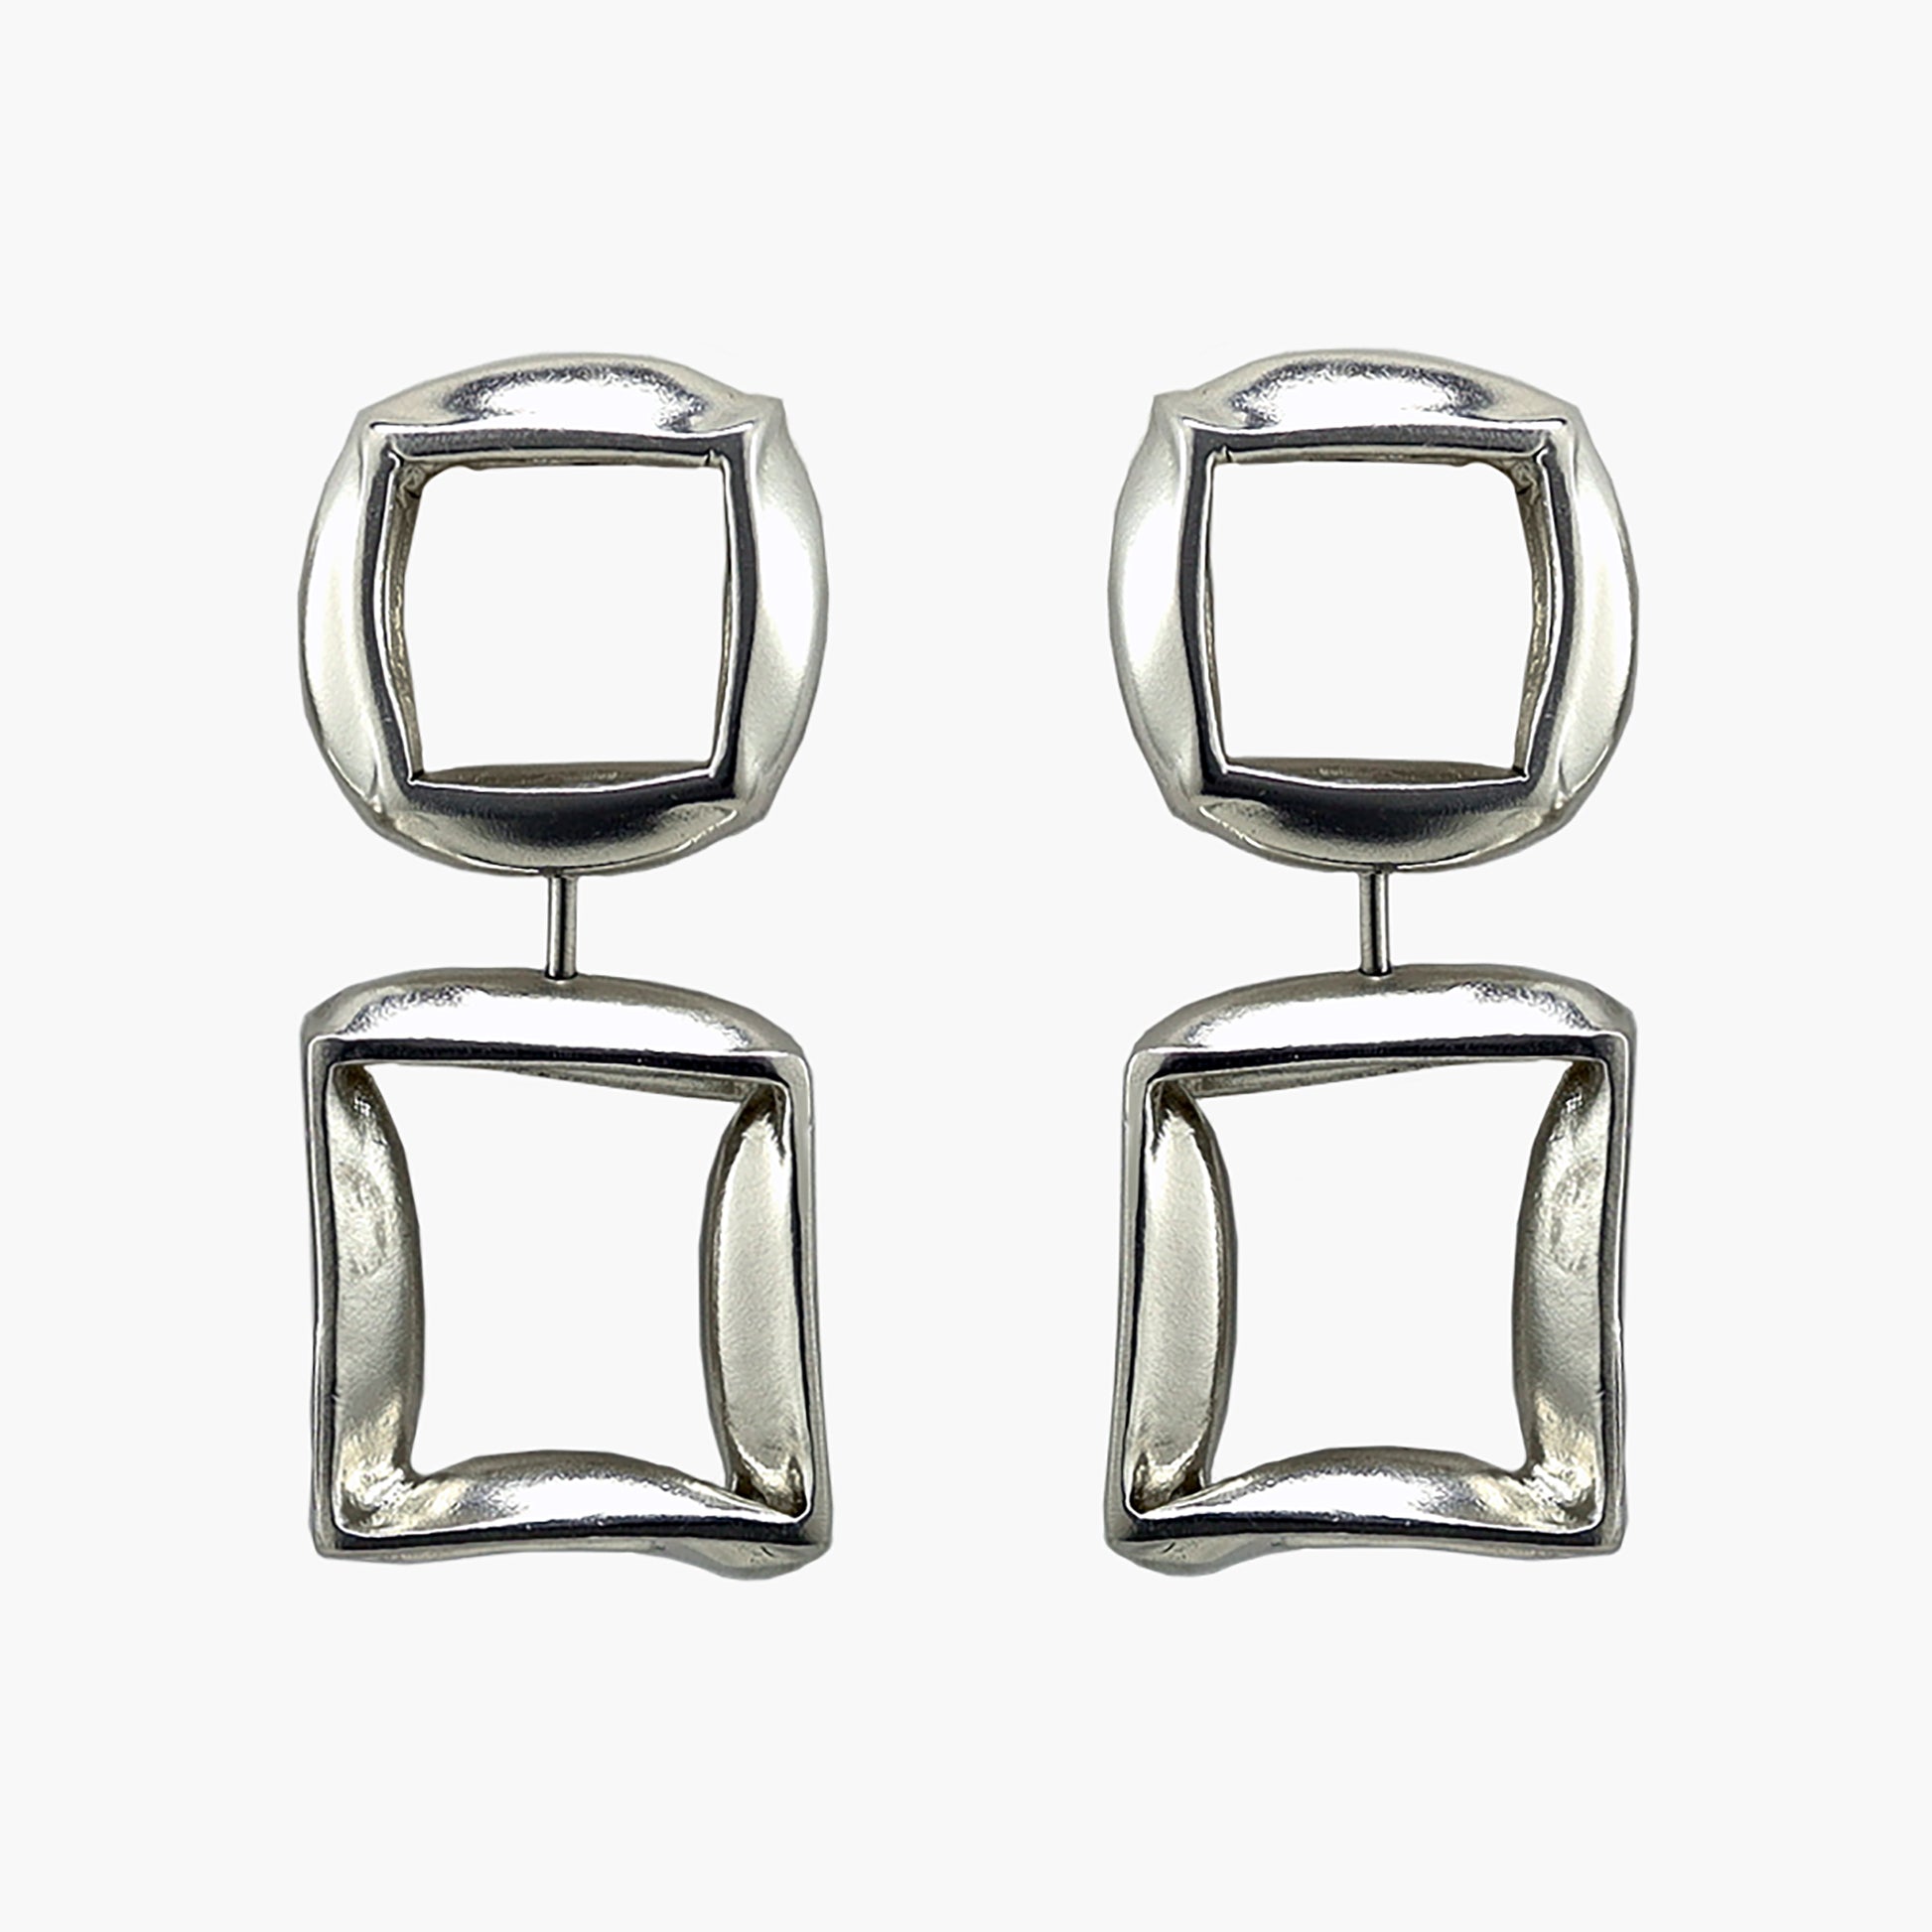 Sterling silver RAFO earrings by Kim Paquet